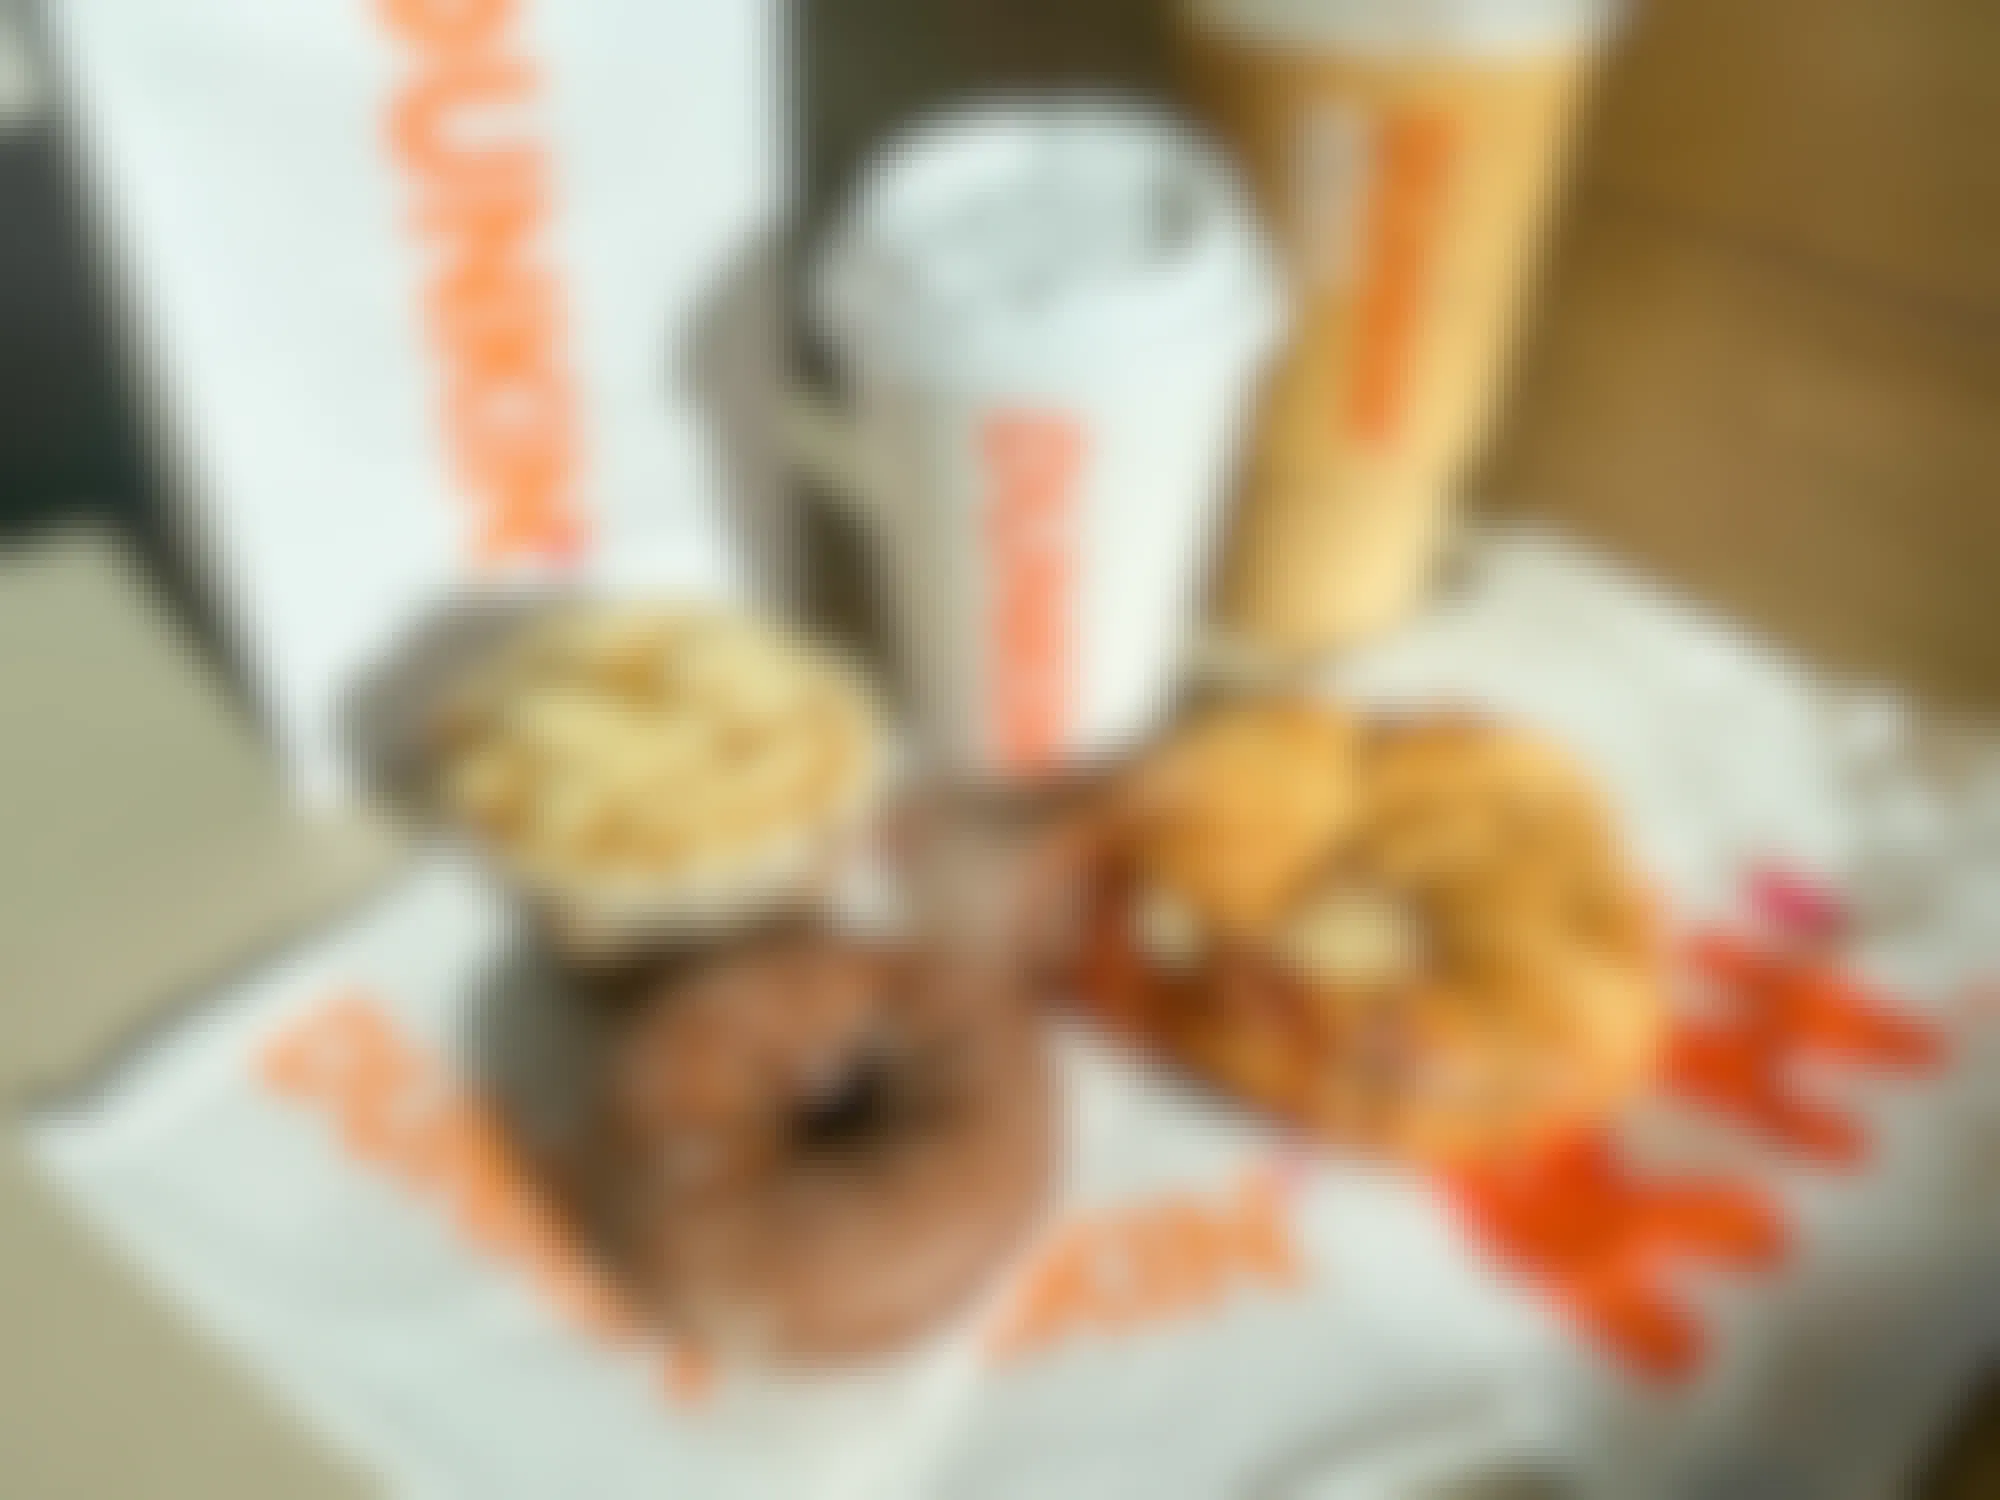 items from the Dunkin fall menu on a table